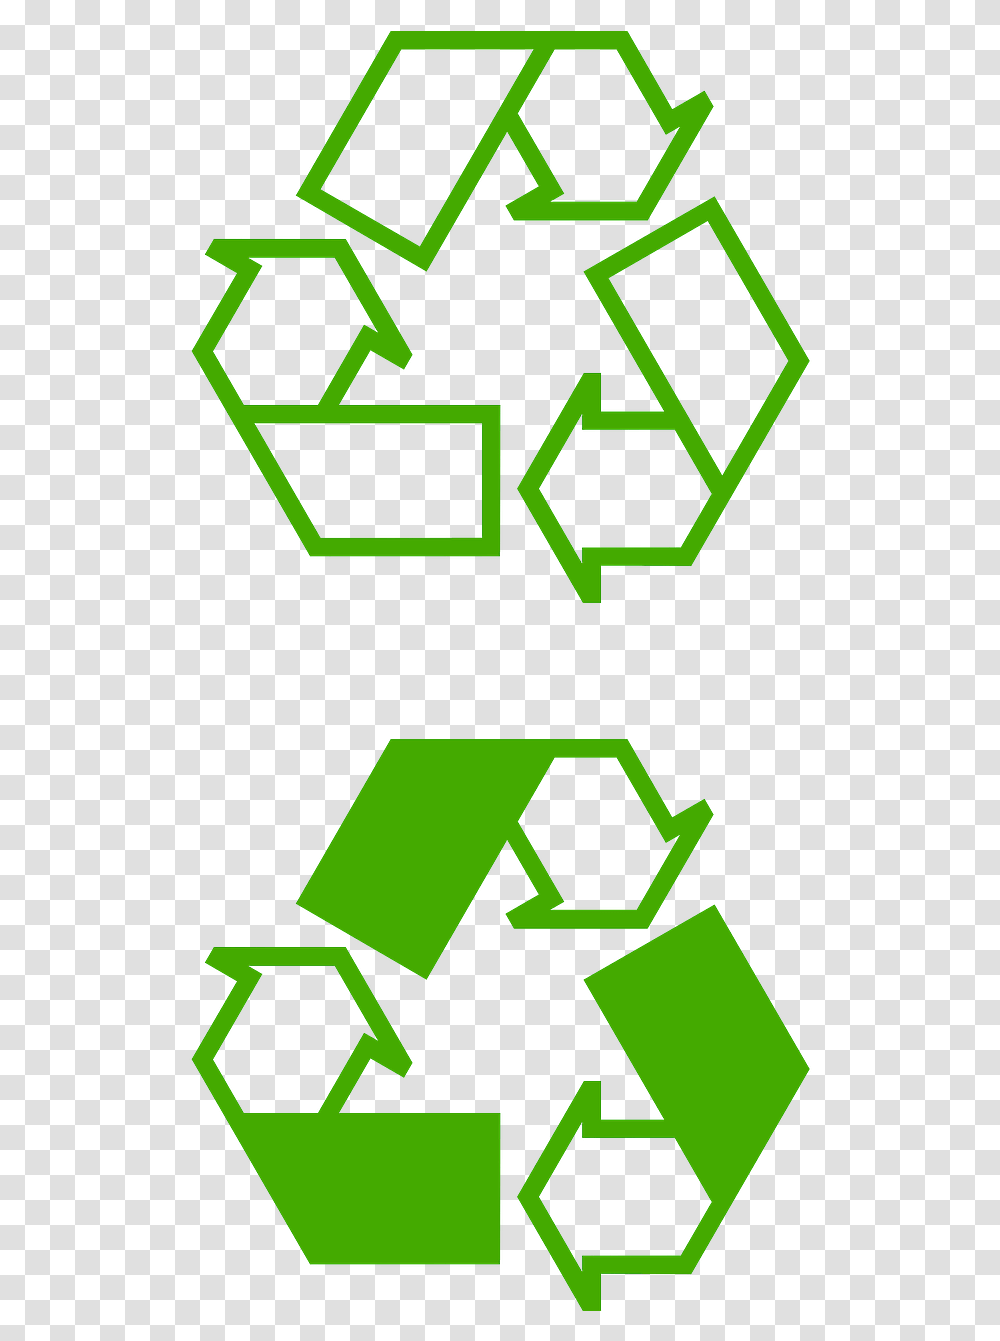 Recycling Logo Recycle Green Ecology Recycle Bin Coloring, Recycling Symbol Transparent Png